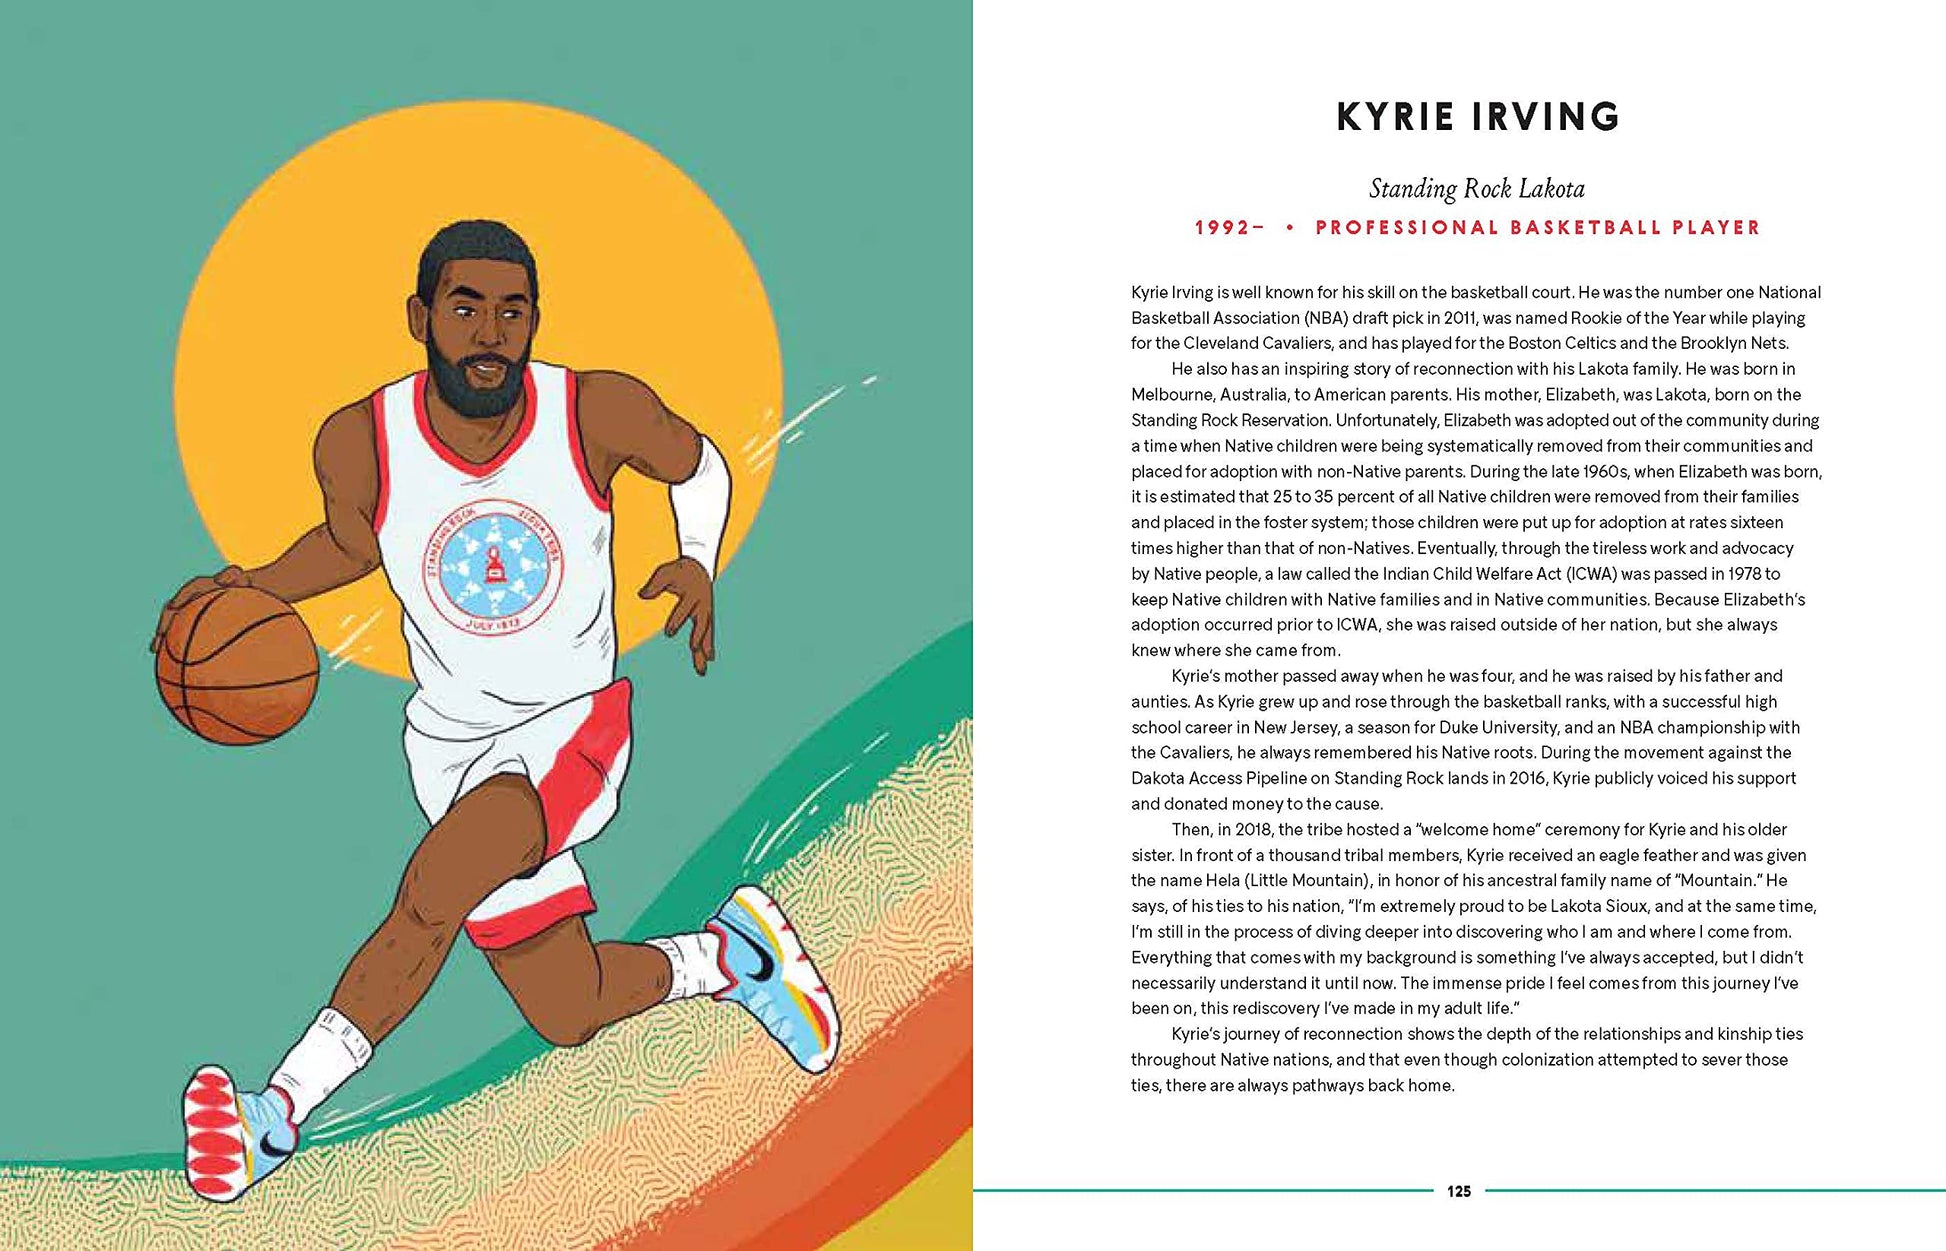 An accessible and educational illustrated book profiling 50 notable American Indian, Alaska Native, and Native Hawaiian people, from NBA star Kyrie Irving of the Standing Rock Lakota to Wilma Mankiller, the first female principal chief of the Cherokee Nation